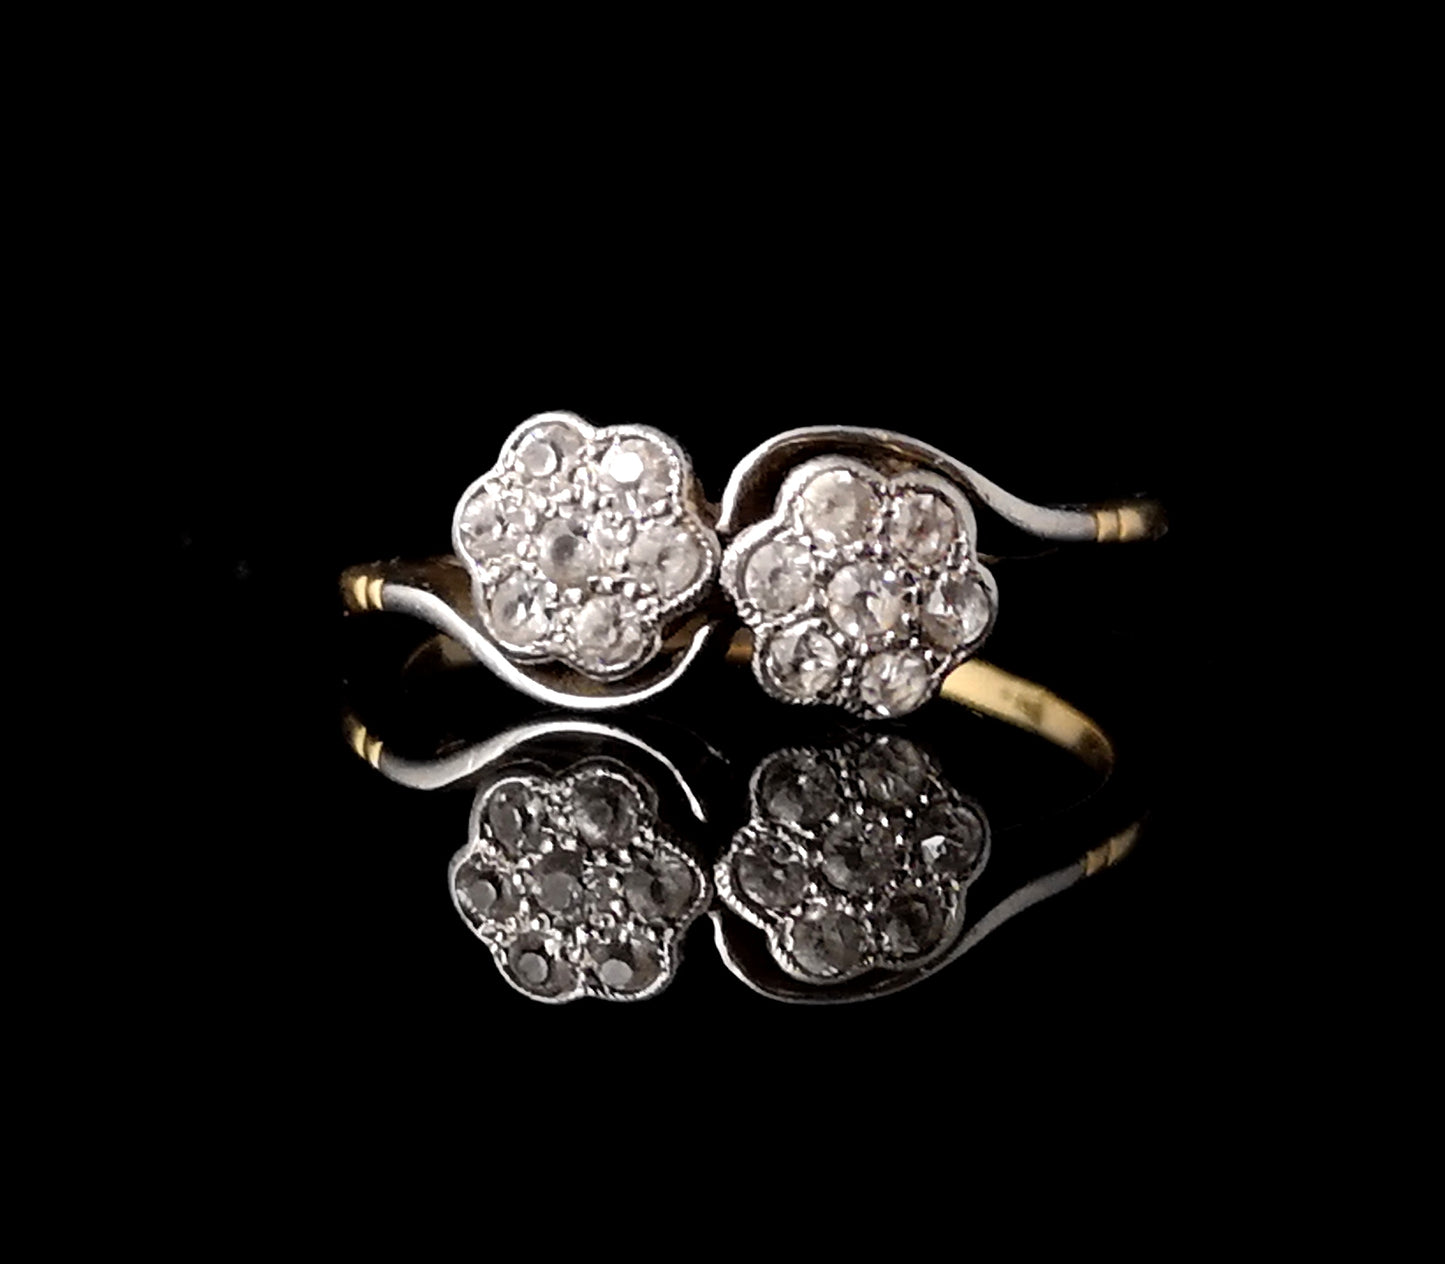 Antique diamond double daisy ring, 18ct gold and platinum, Edwardian